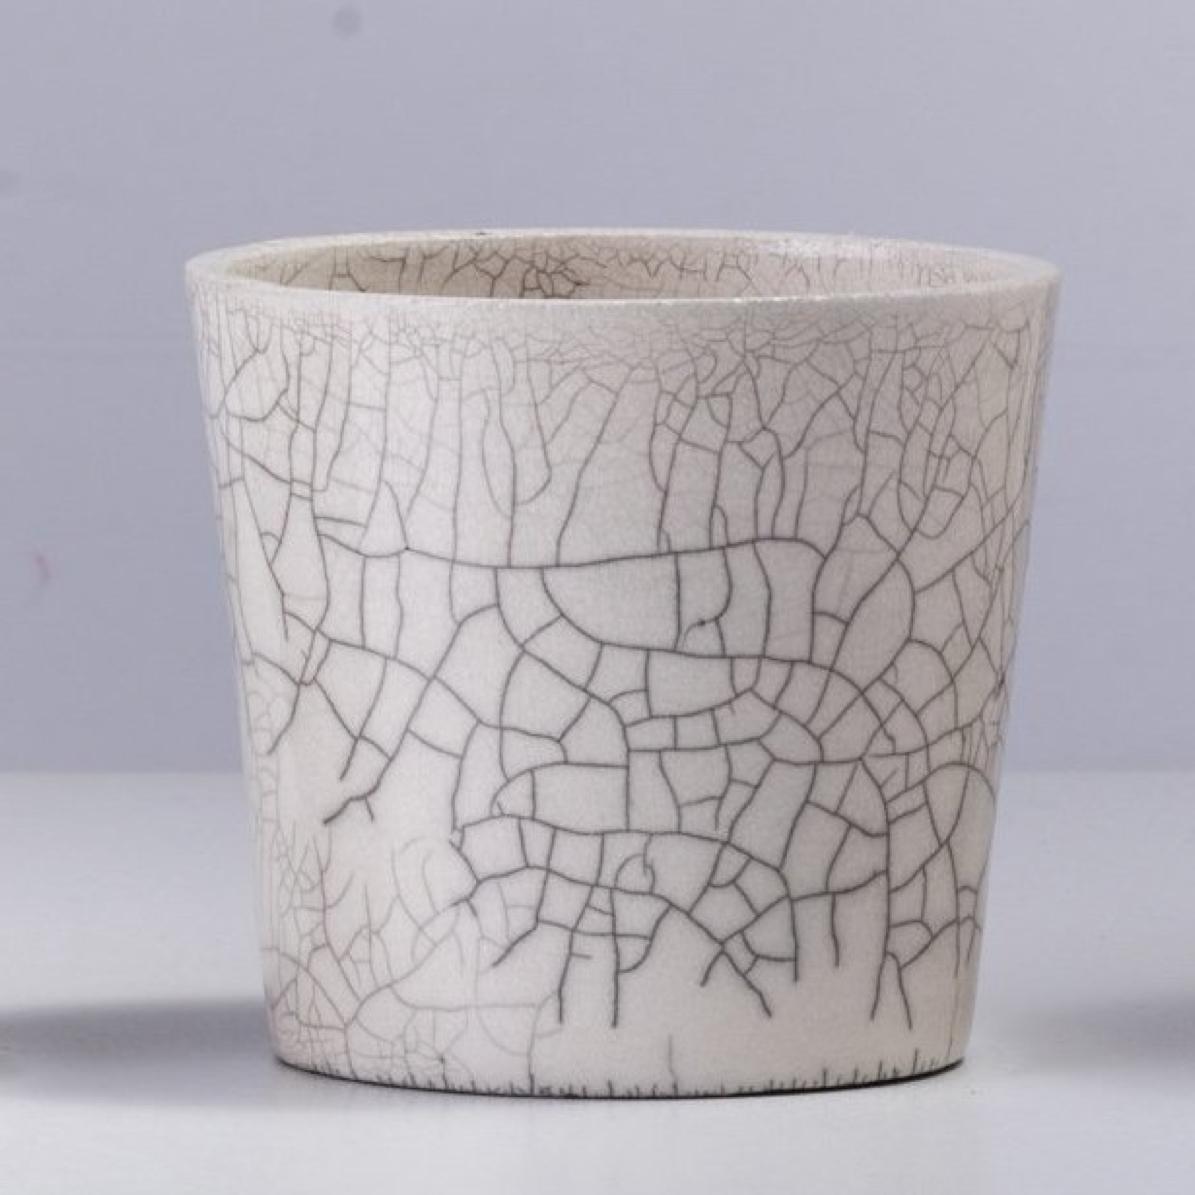 Japanese Minimalistic Laab Mangkuk Set of 4 Bowl Raku Ceramics Crackle White In New Condition For Sale In monza, Monza and Brianza